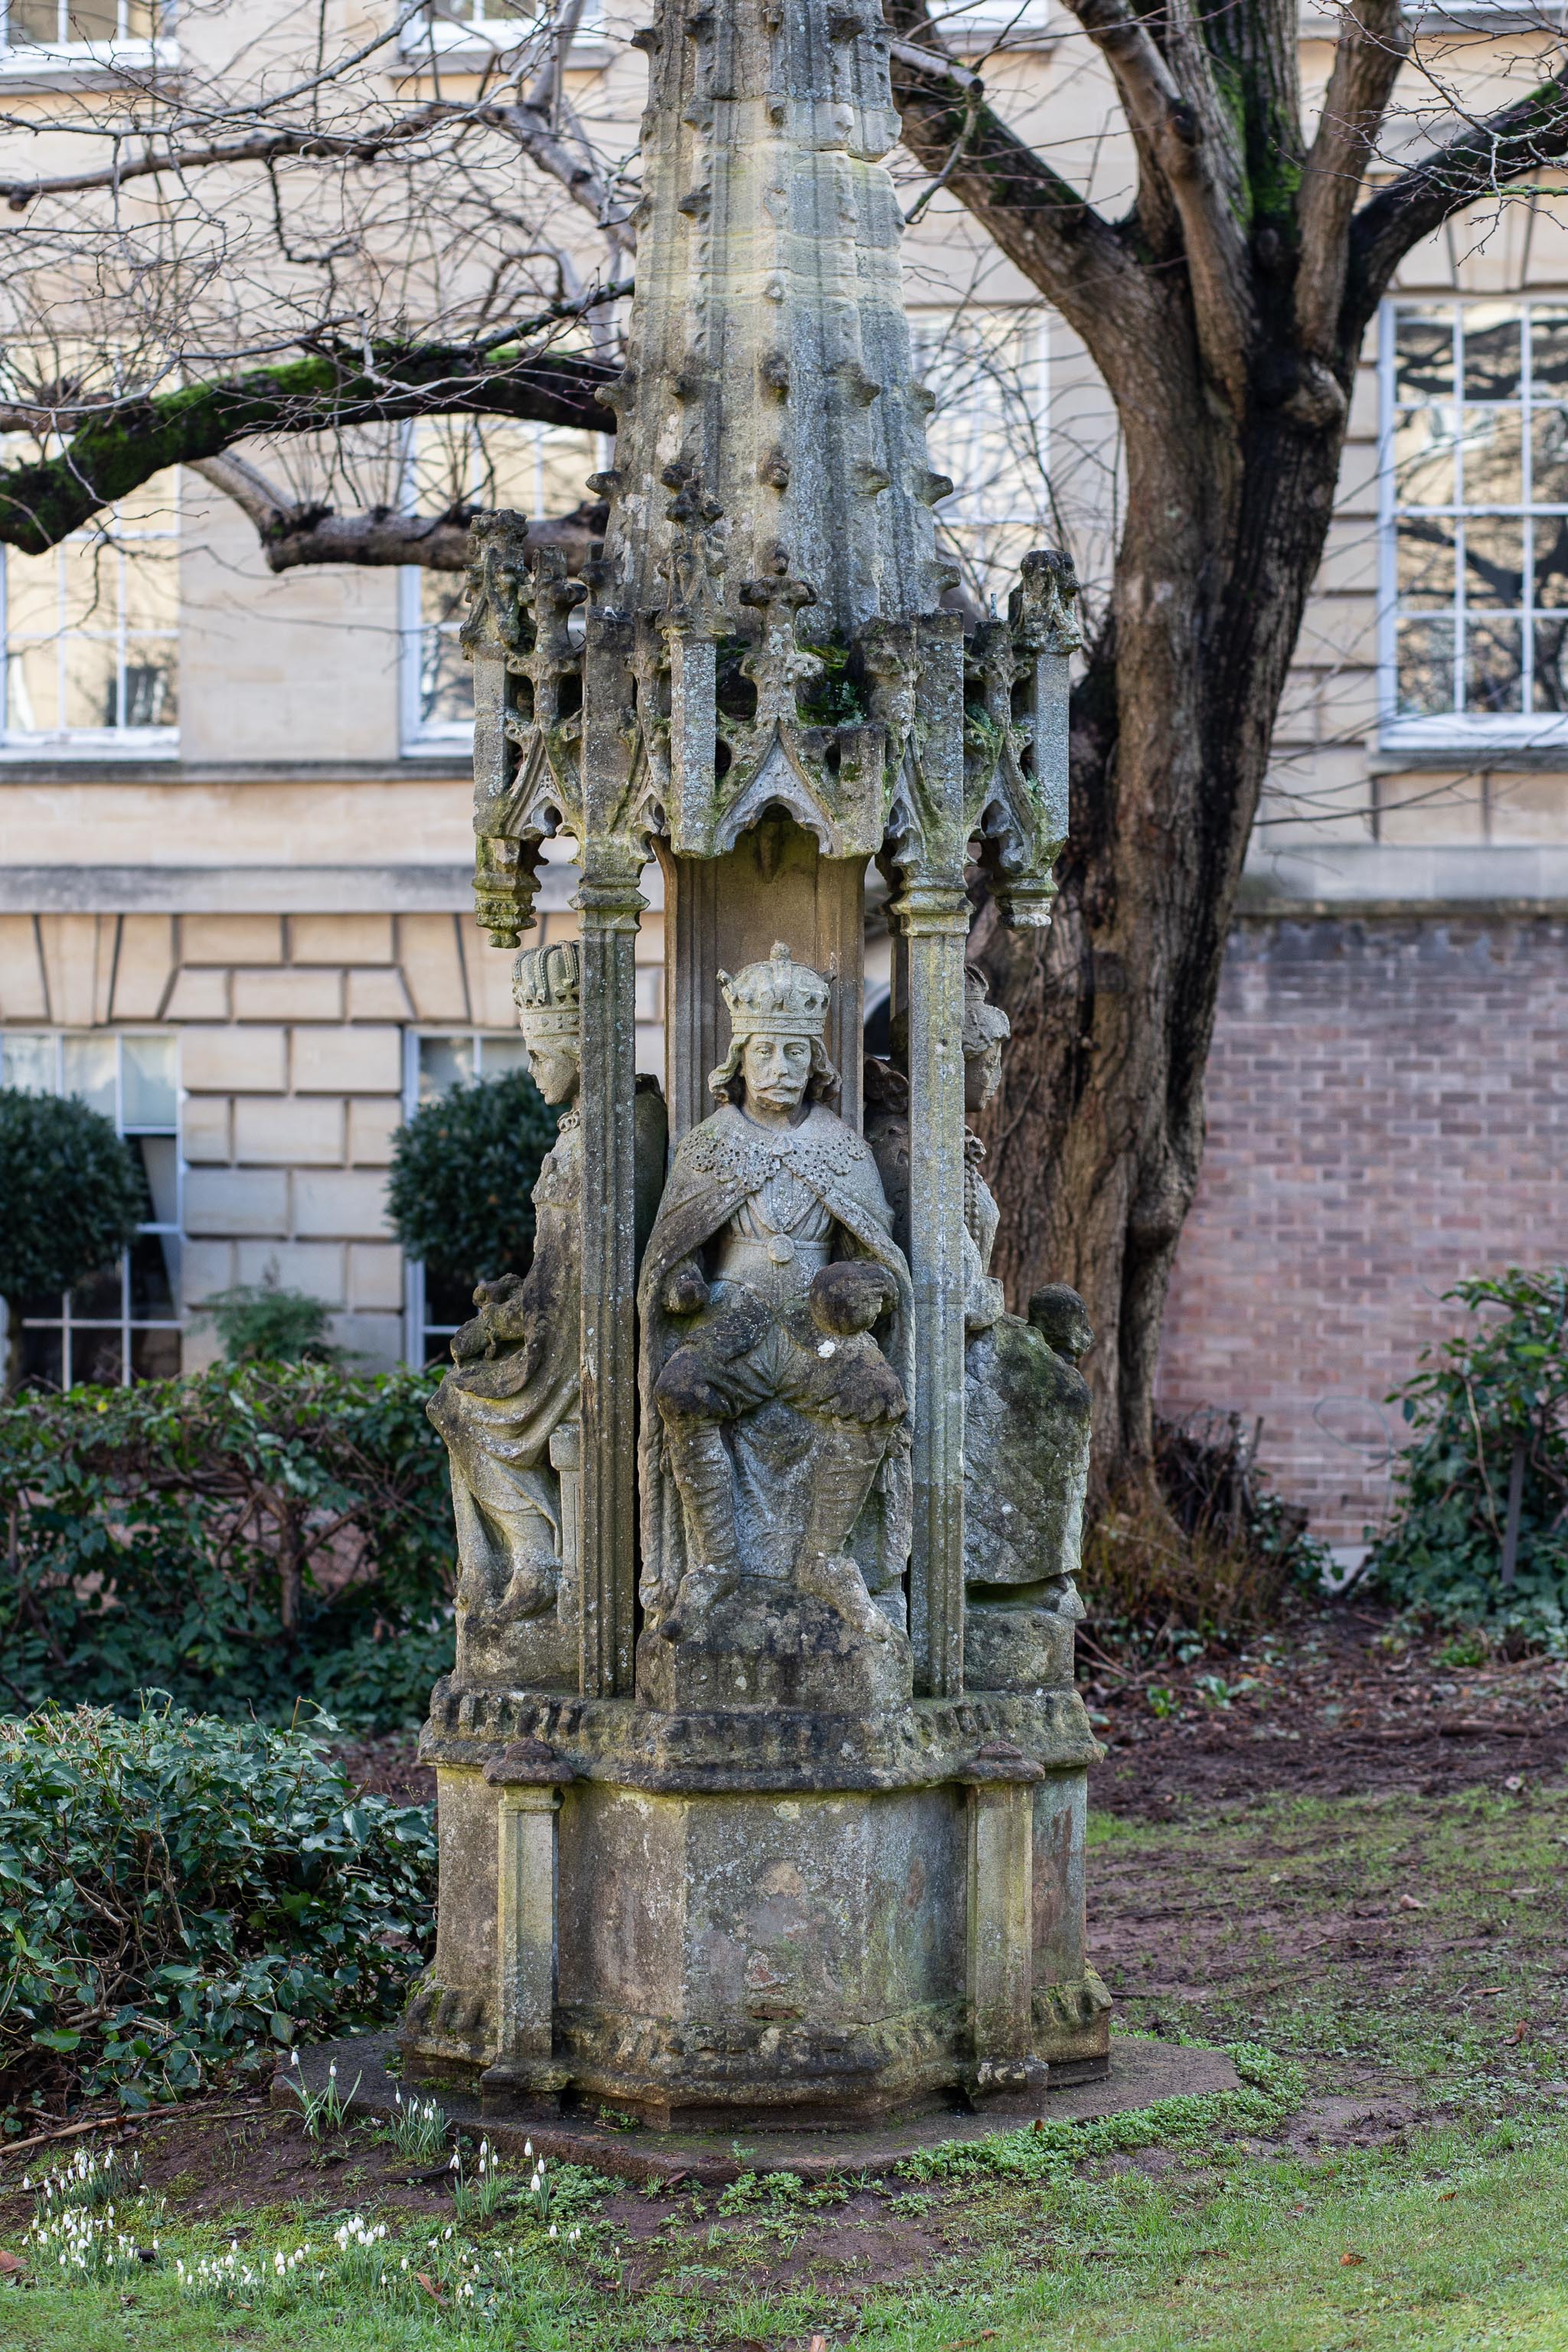 Replica
Very long story short: it's a cut-down replica of the Bristol High Cross. The original used to stand in the centre of Bristol, erected in 1373 to c...